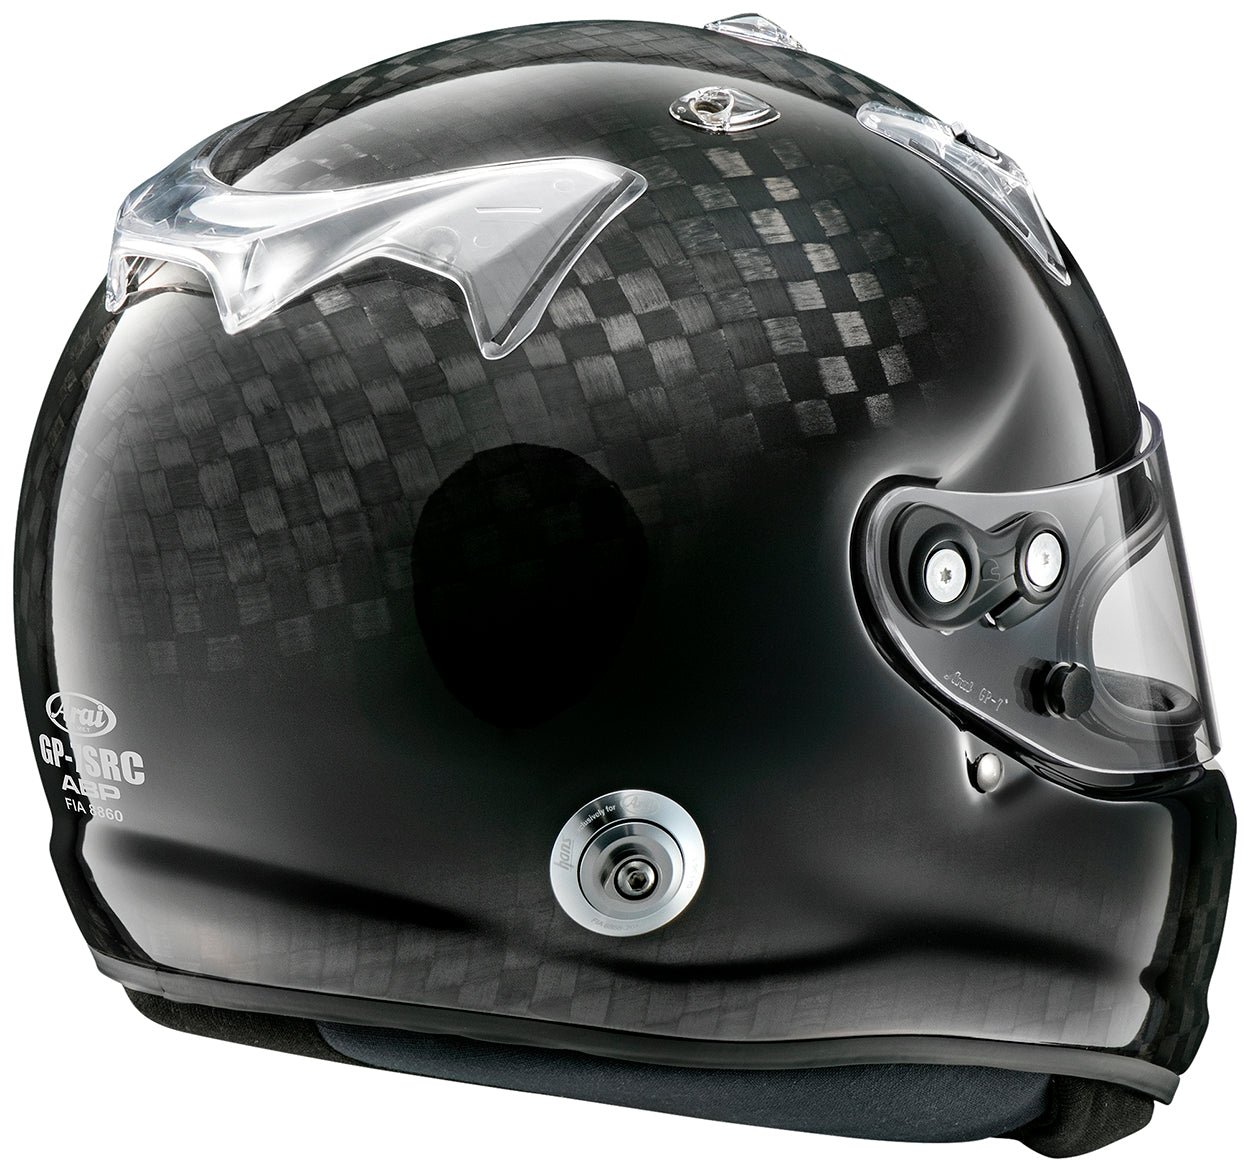 ARAI GP-7SRC ABP 8860-2018 CARBON FIBER HELMET IN STOCK WITH THE BIGGEST DISCOUNTS FOR THE LOWEST PRICE AND BEST DEAL ON A ARAI GP-7SRC ABP 8860-2018 CARBON FIBER HELMET REAR IMAGE